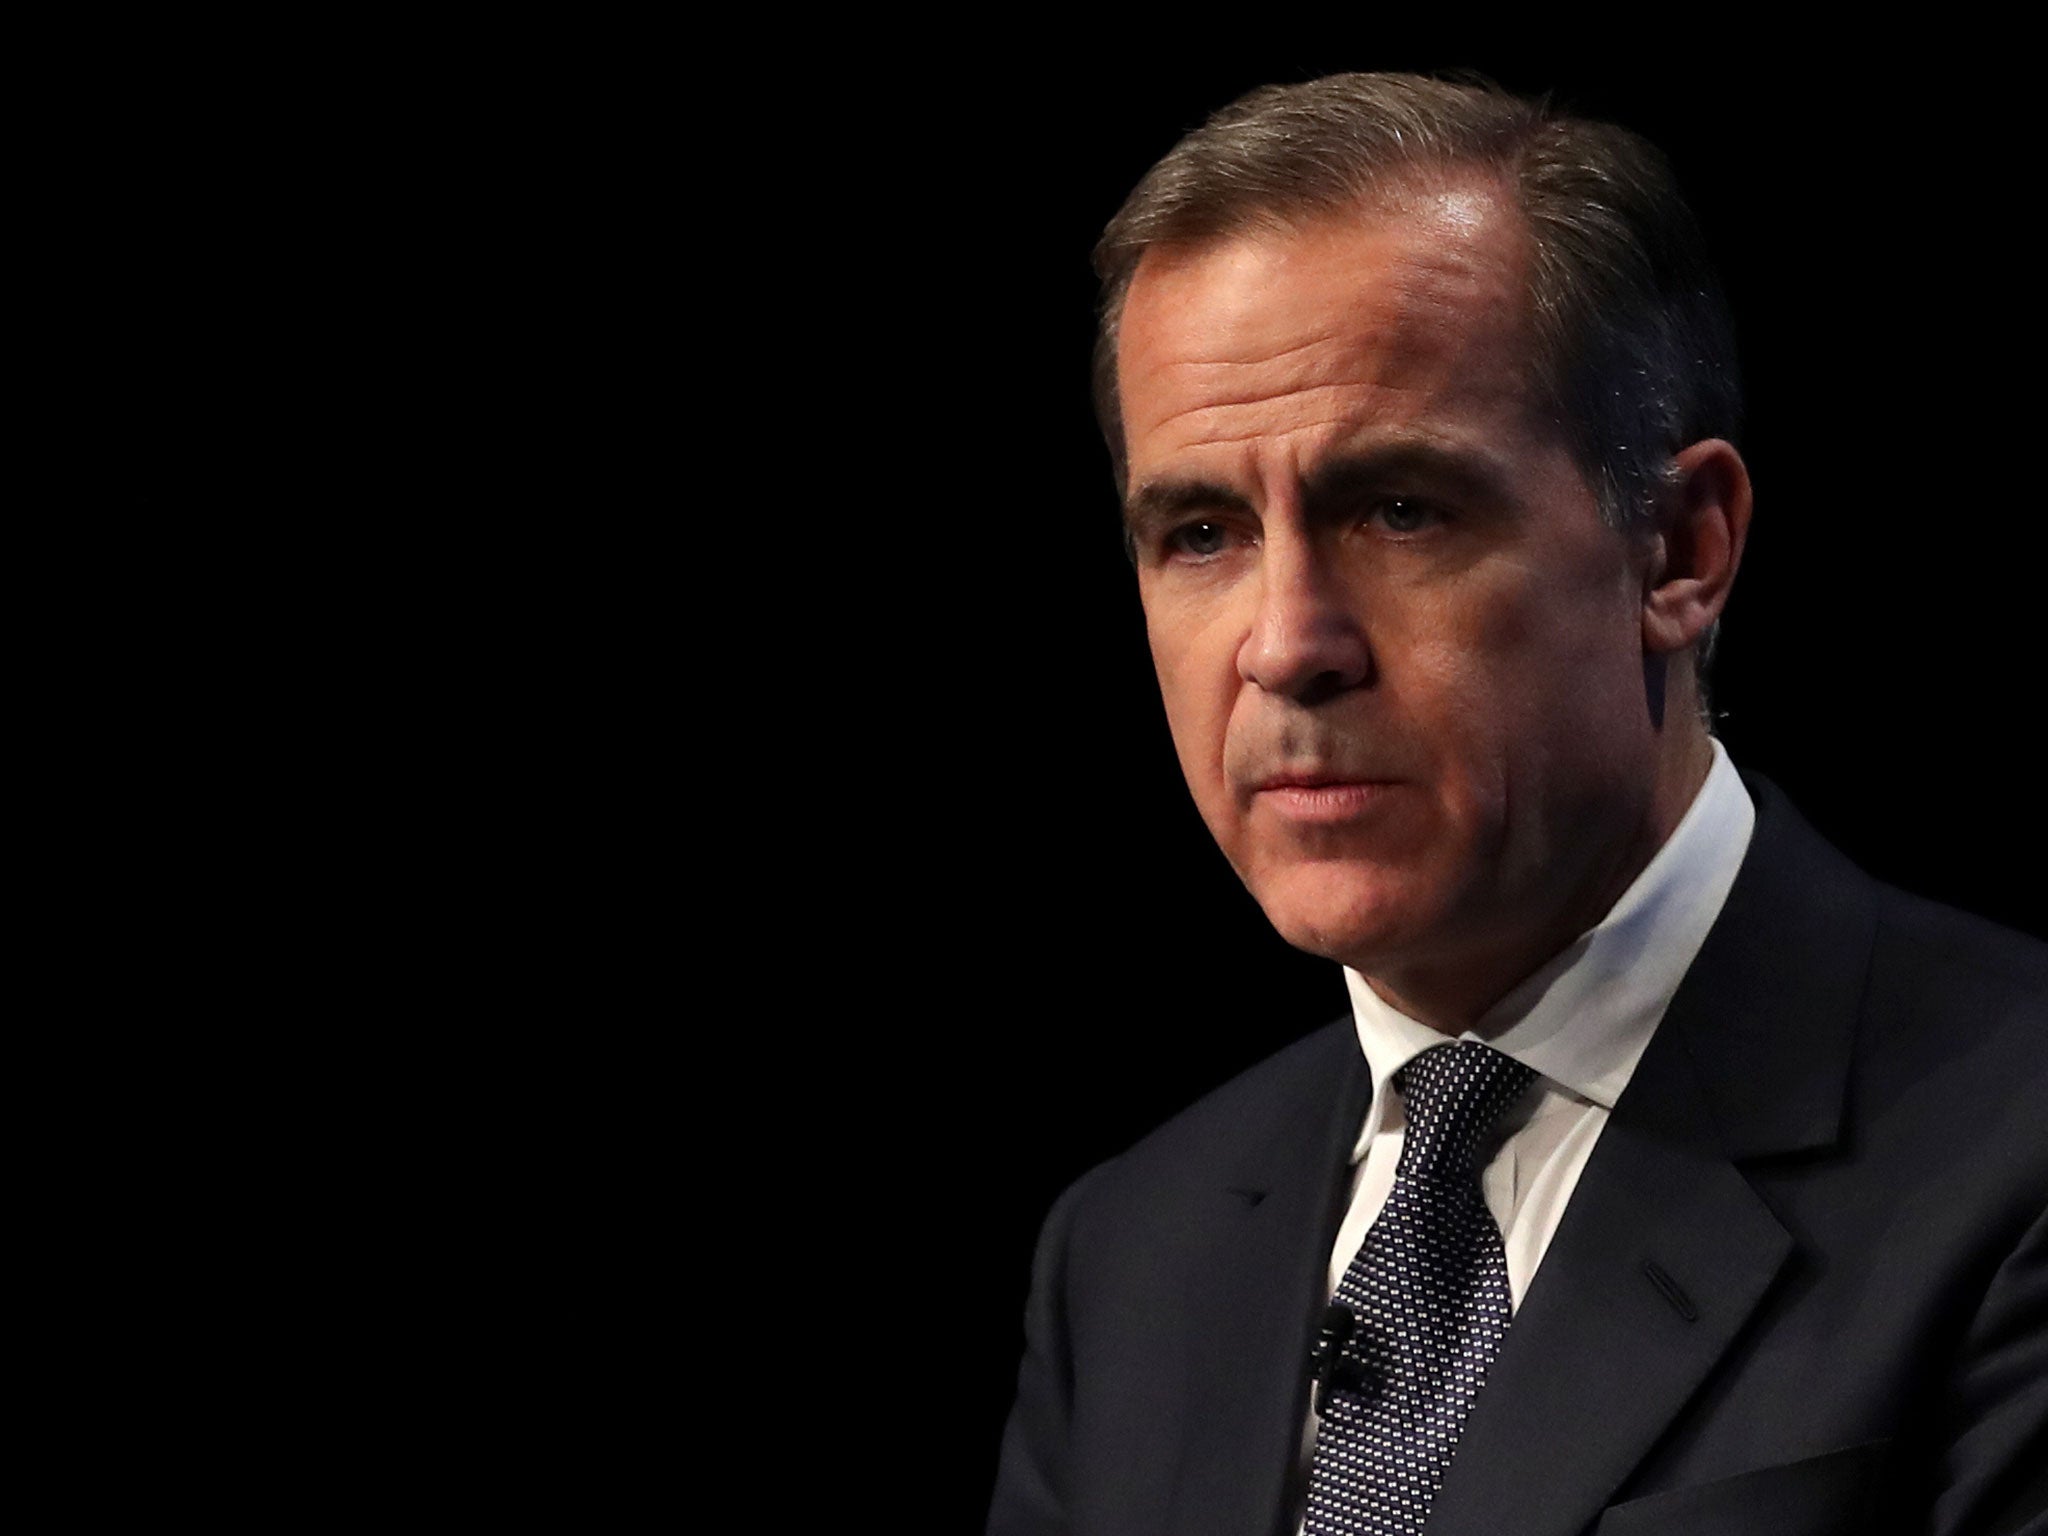 Brexit latest: Bank saved 250,000 jobs by cutting rates after referendum, says Mark Carney